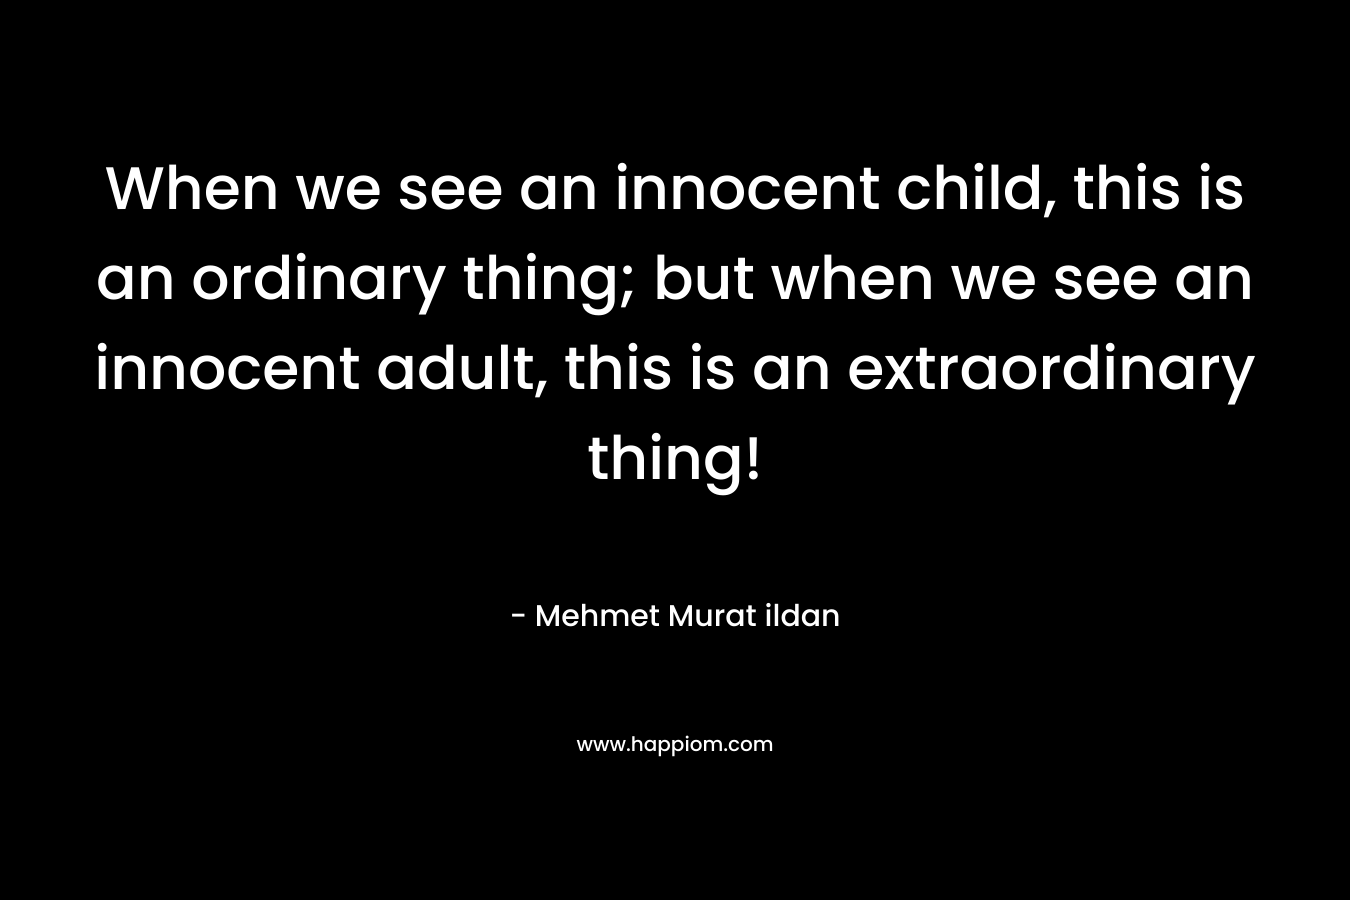 When we see an innocent child, this is an ordinary thing; but when we see an innocent adult, this is an extraordinary thing! – Mehmet Murat ildan